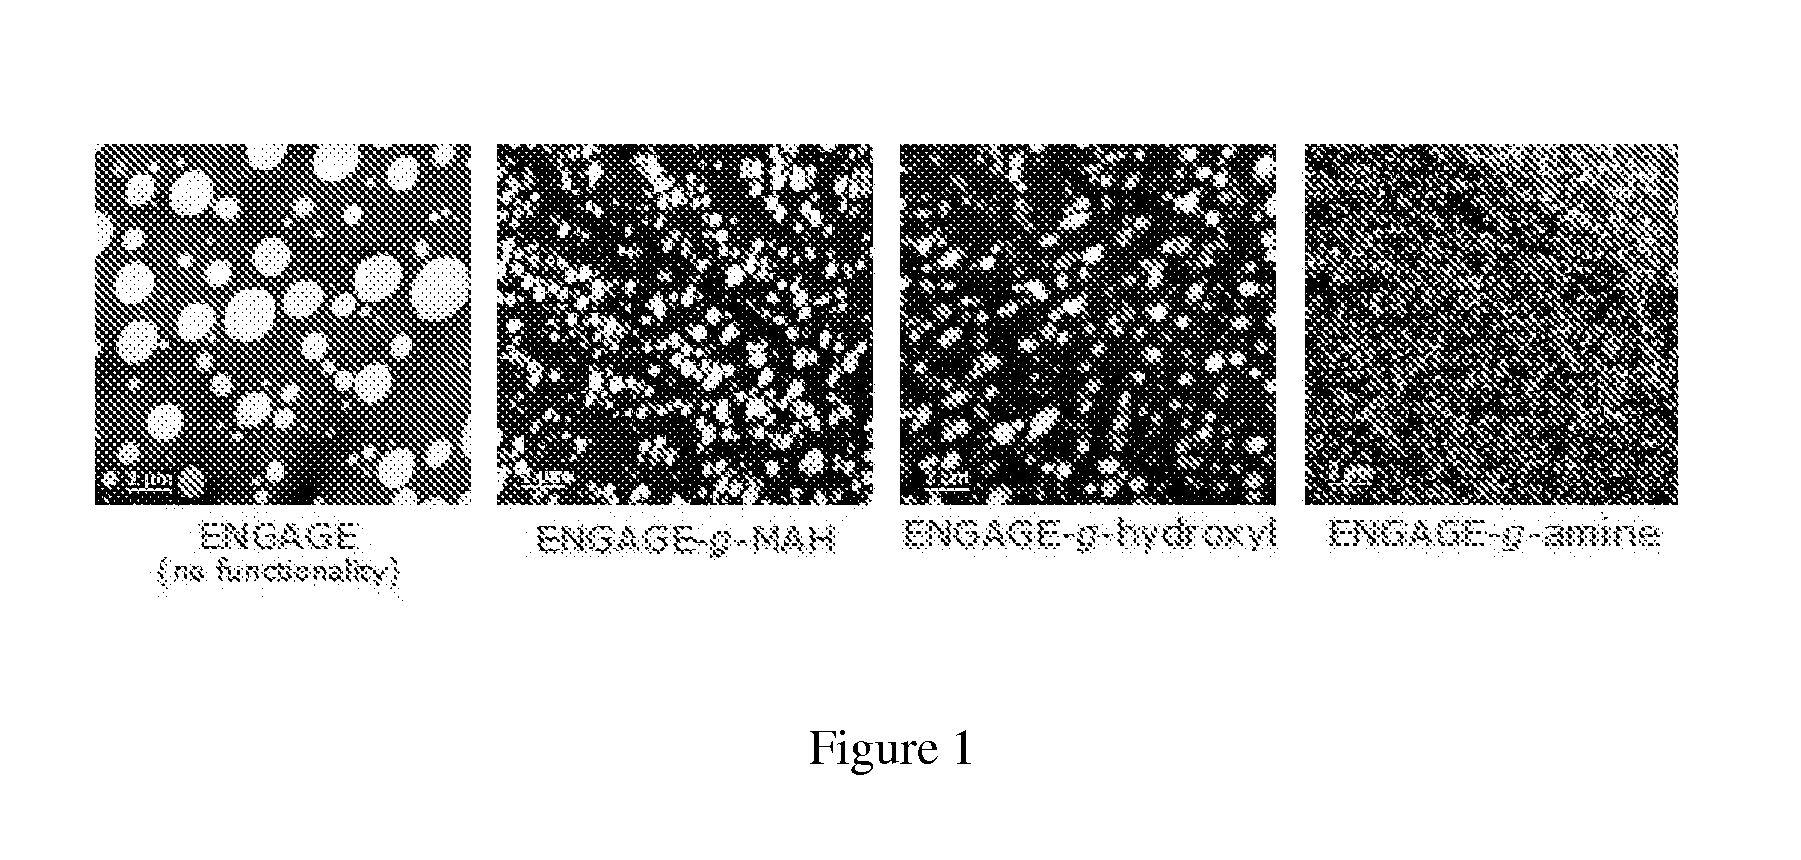 Functionalized olefin polymers, compositions and articles prepared therefrom, and methods for making the same